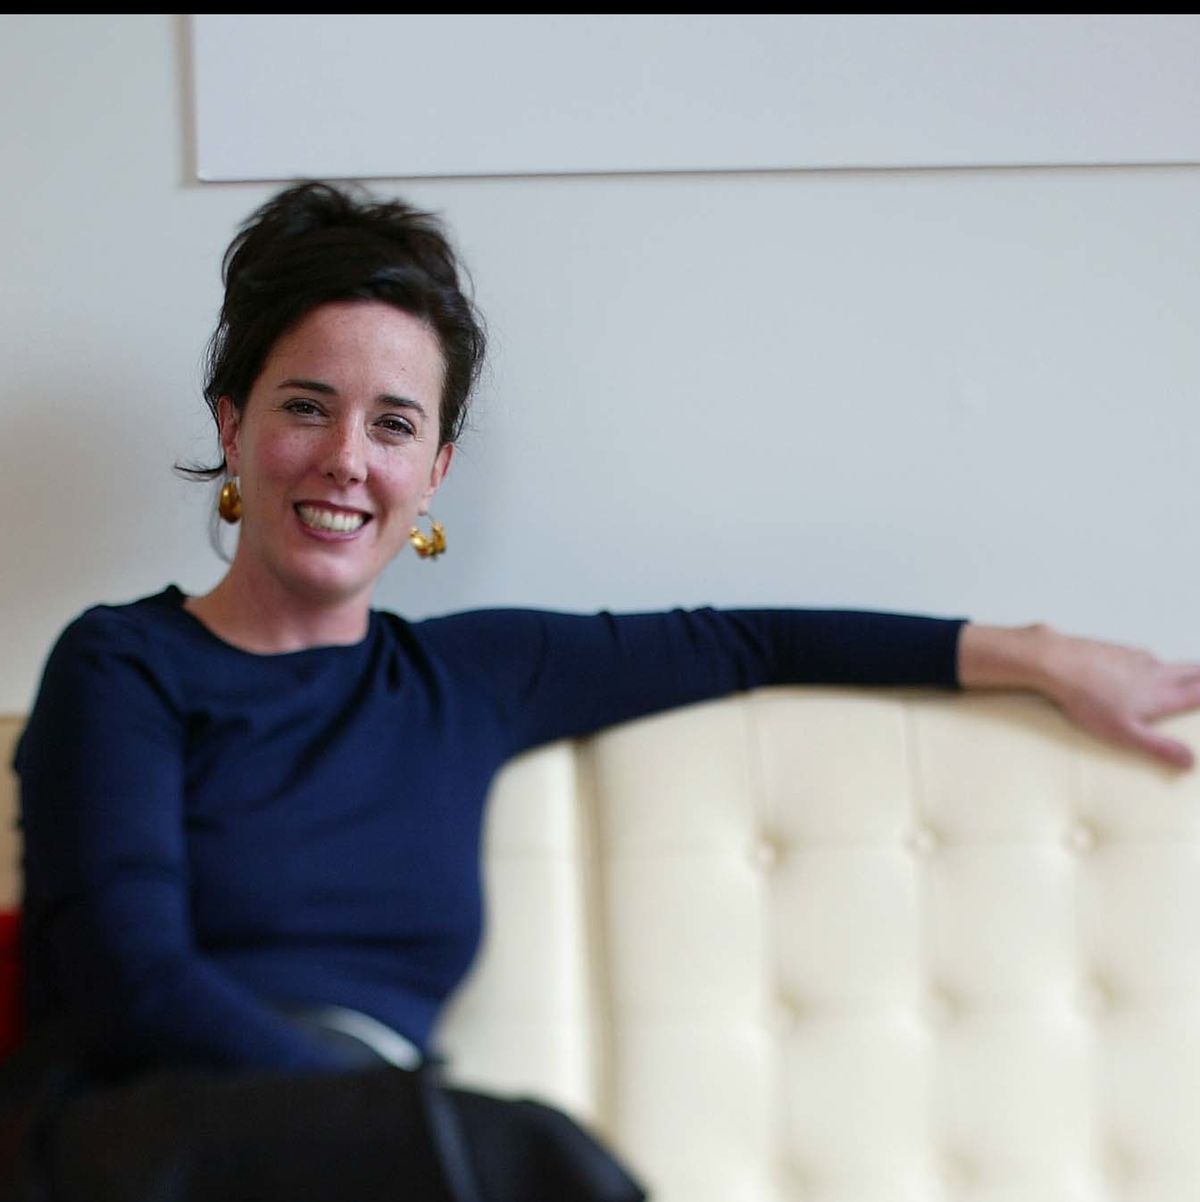 Kate Spade Net Worth 2018 - How the Late Fashion Designer Built